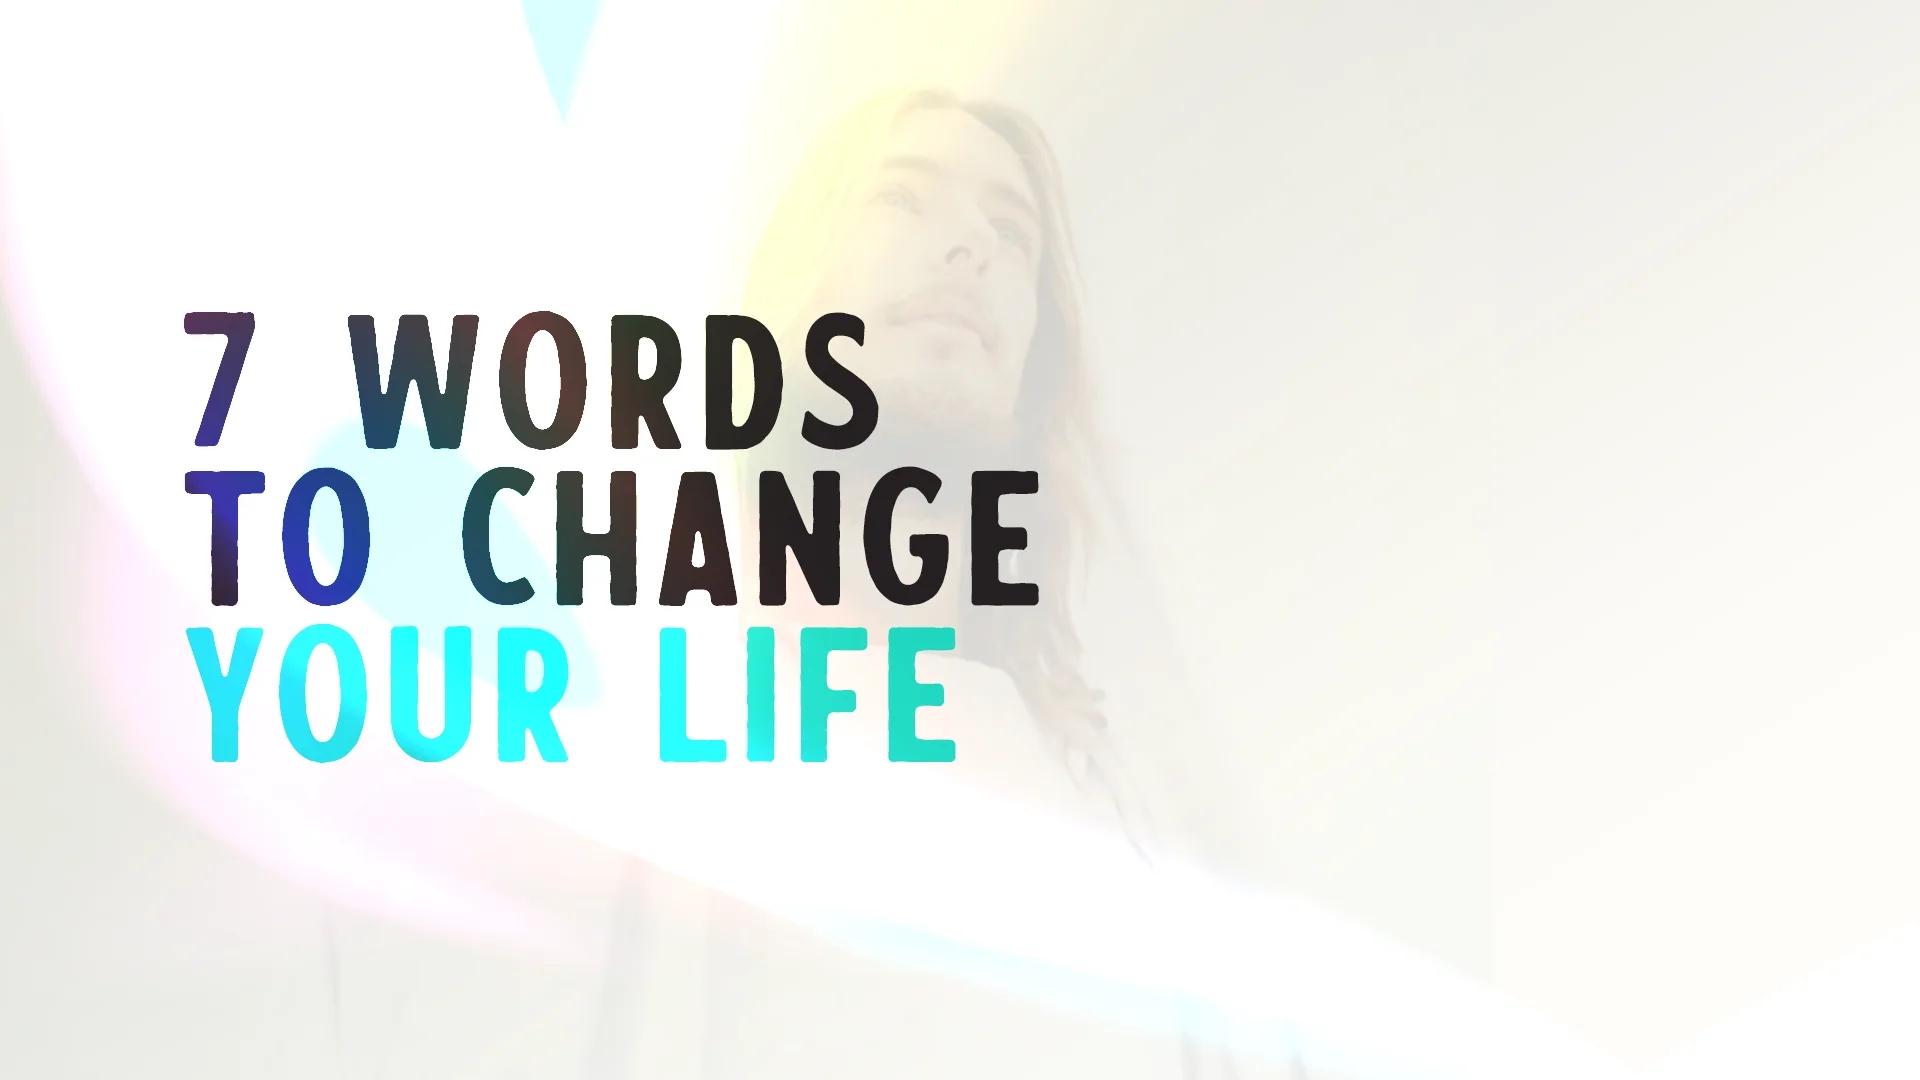 7 Words to Change Your Life